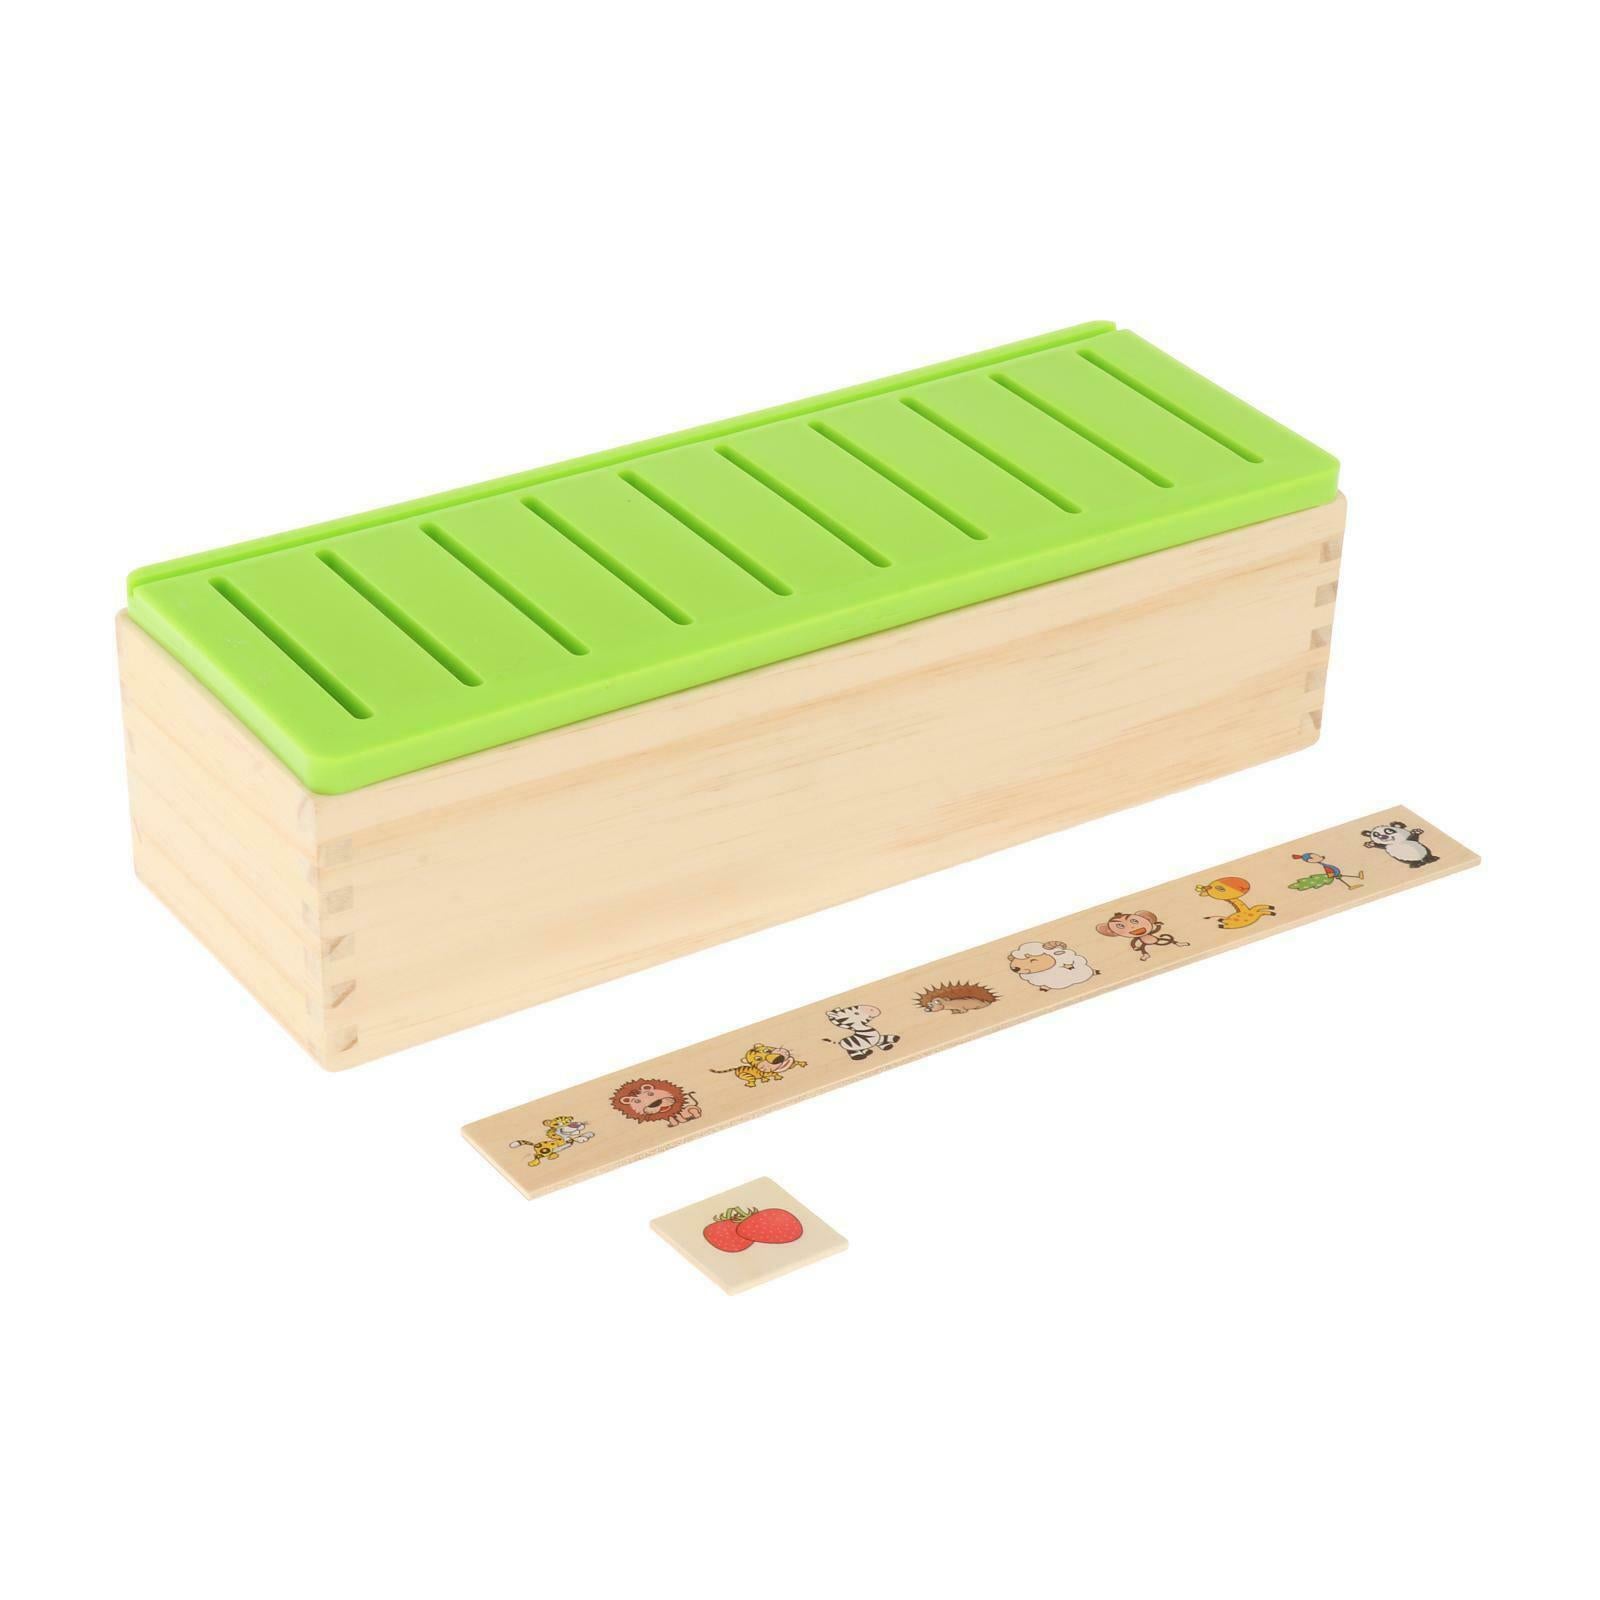 Wooden Puzzle Sorting Toys w/ Sorting Lid Learning Game for Toddlers Kids